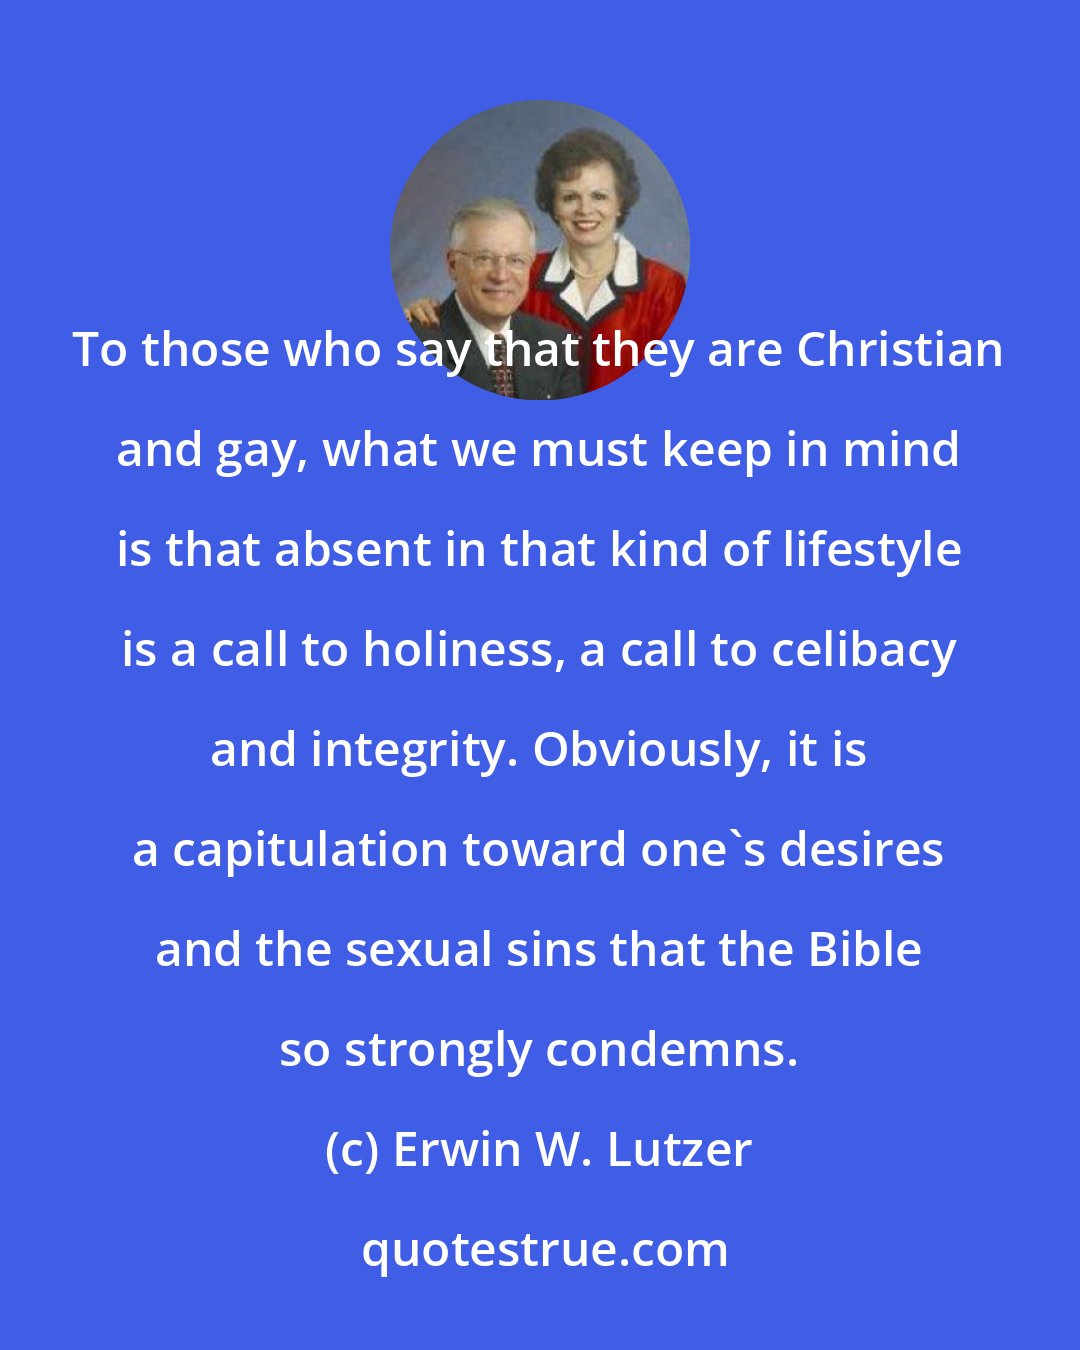 Erwin W. Lutzer: To those who say that they are Christian and gay, what we must keep in mind is that absent in that kind of lifestyle is a call to holiness, a call to celibacy and integrity. Obviously, it is a capitulation toward one's desires and the sexual sins that the Bible so strongly condemns.